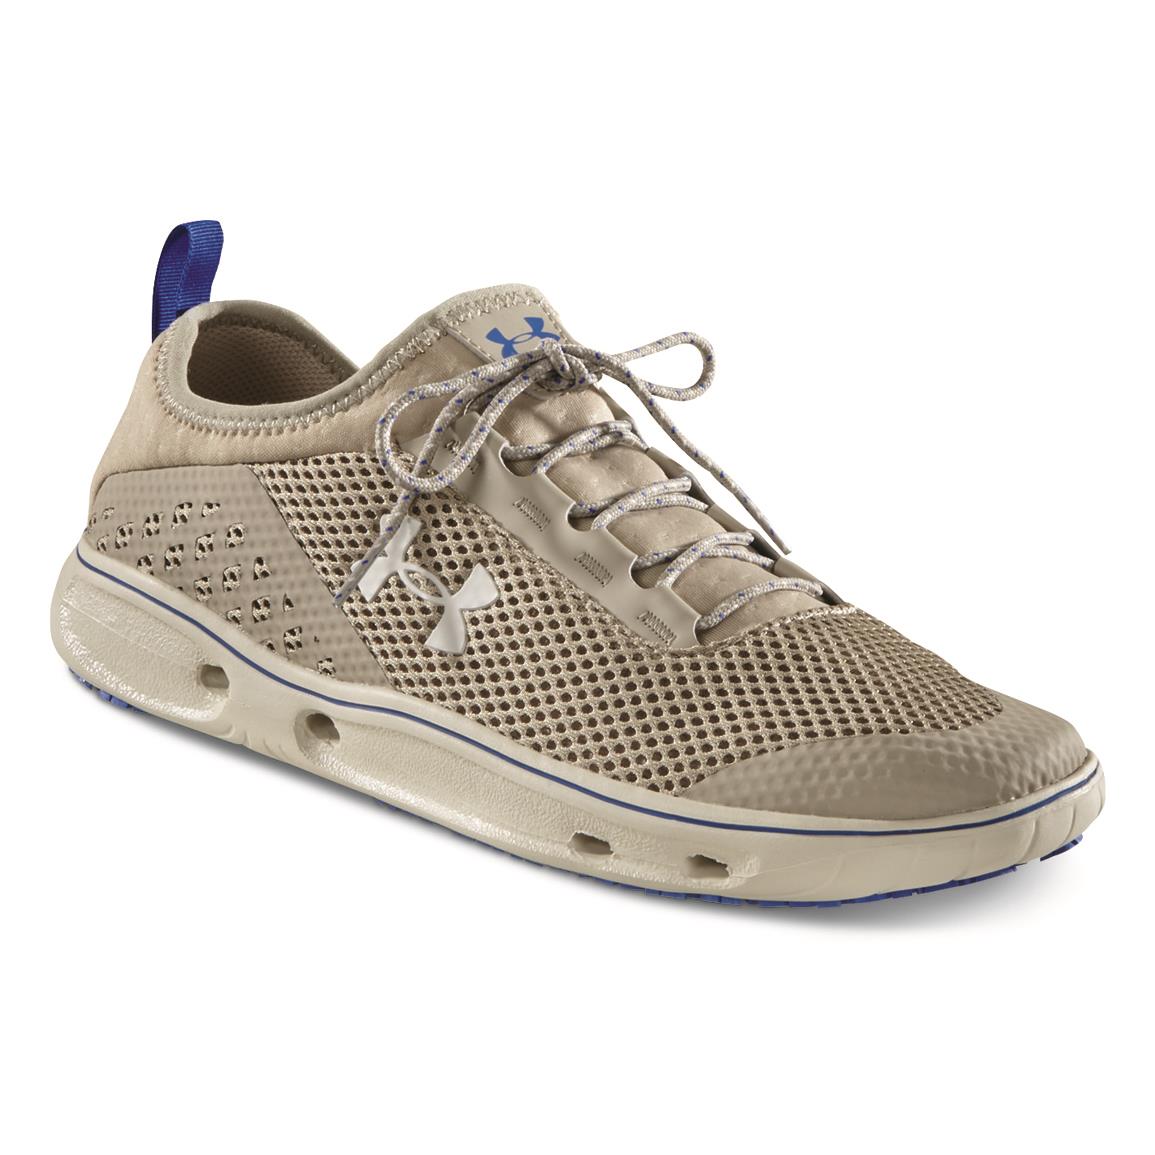 Under Armour Men's Kilchis Water Shoes 656095, Boat